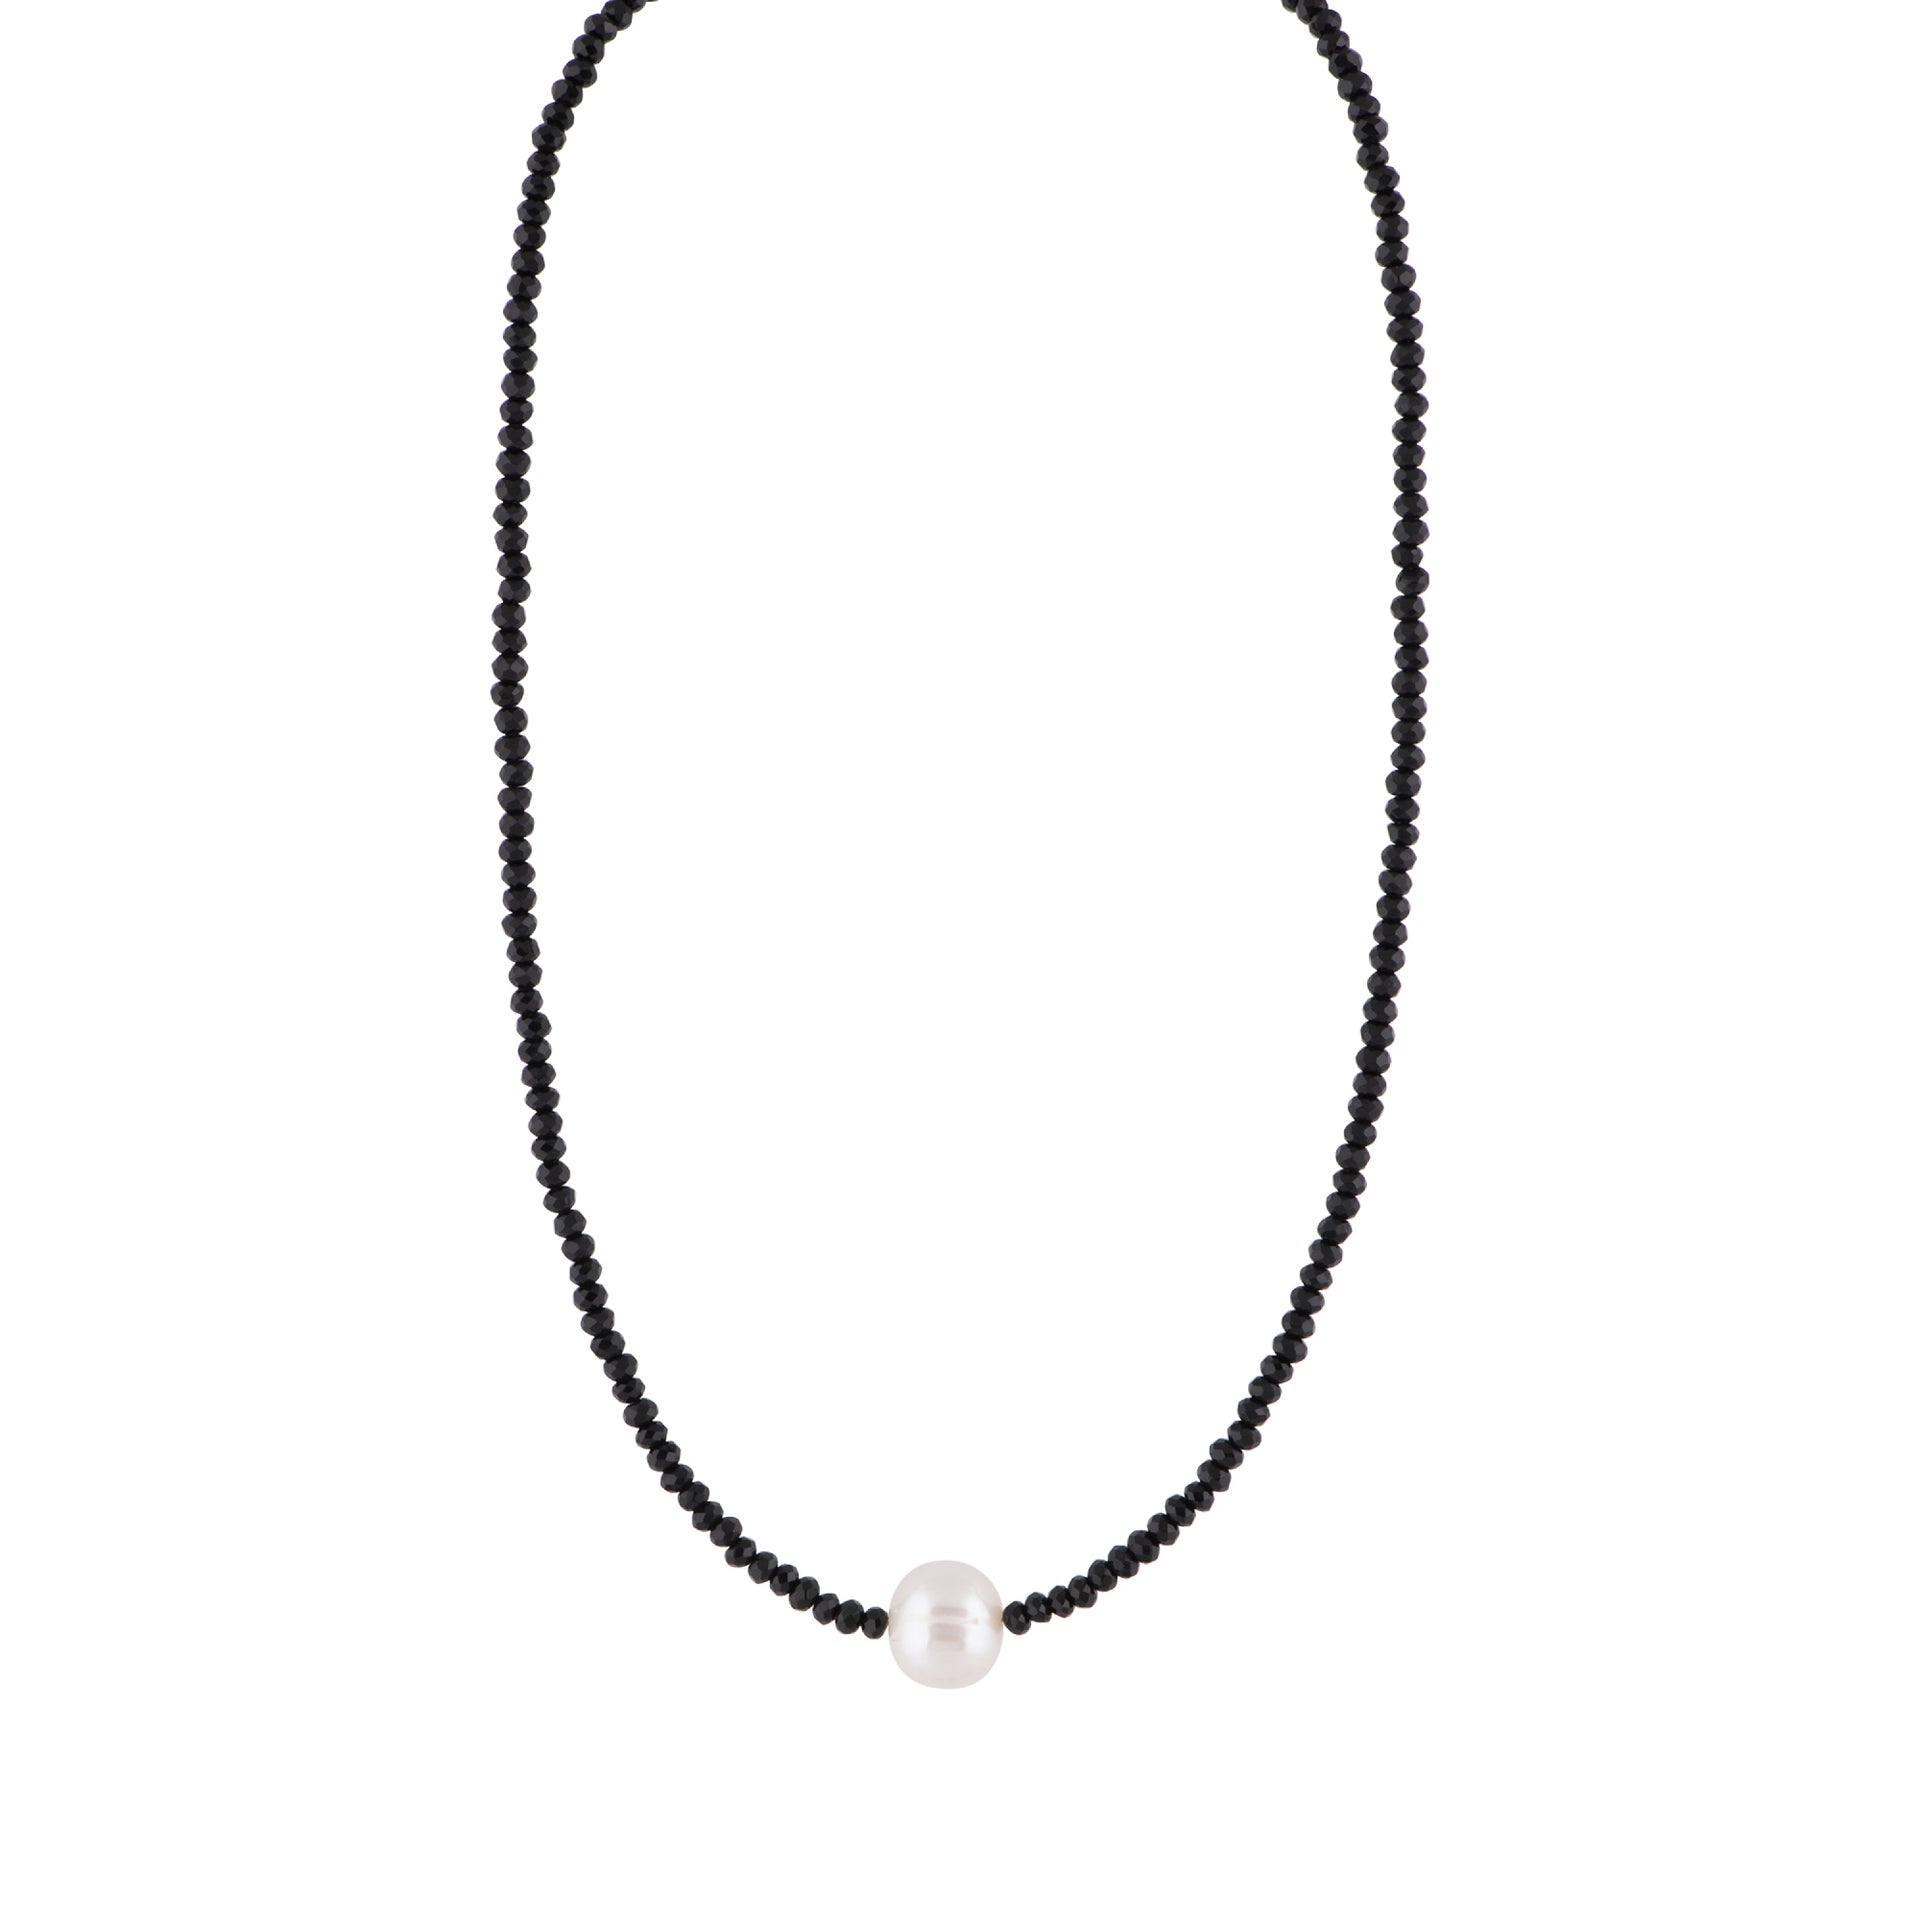 Define Your Style with 5 Silver Choker Necklaces - Paksha